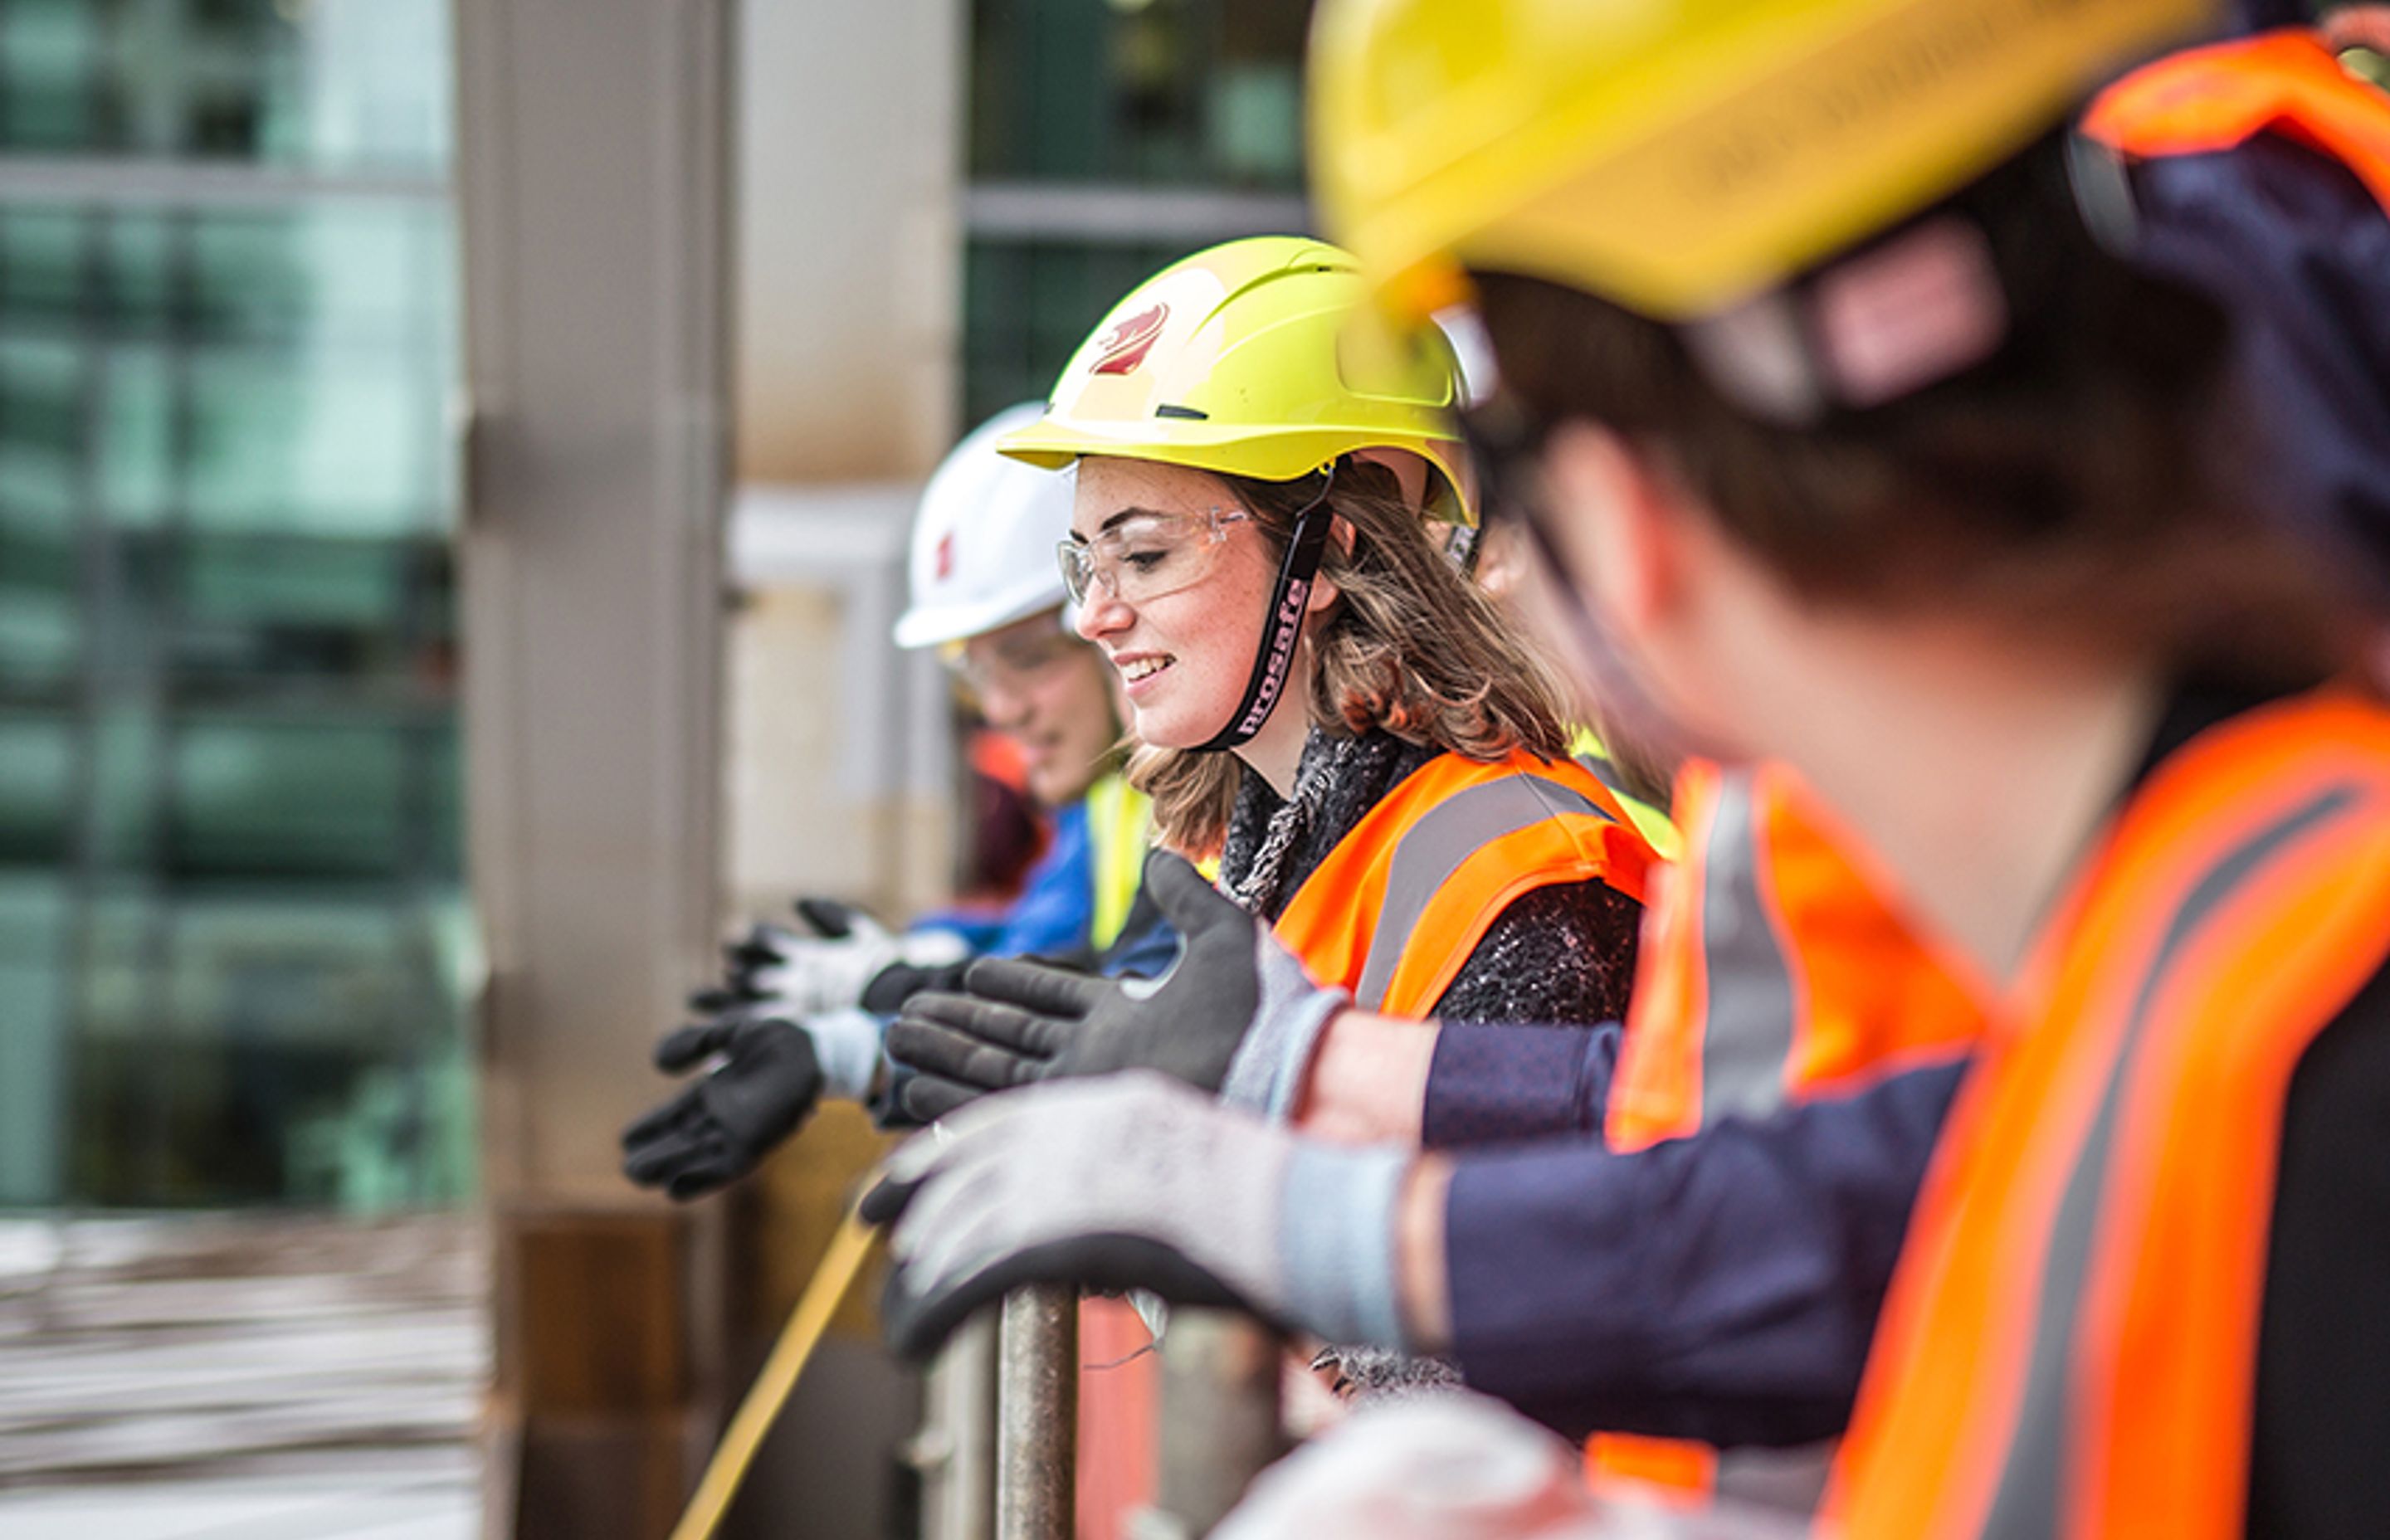 Women make up only 18 per cent of the construction sector workforce. A recent announcement was made that the Construction Sector Accord is partnering with Diversity Works to conduct research on diversity and inclusion practices across the sector.